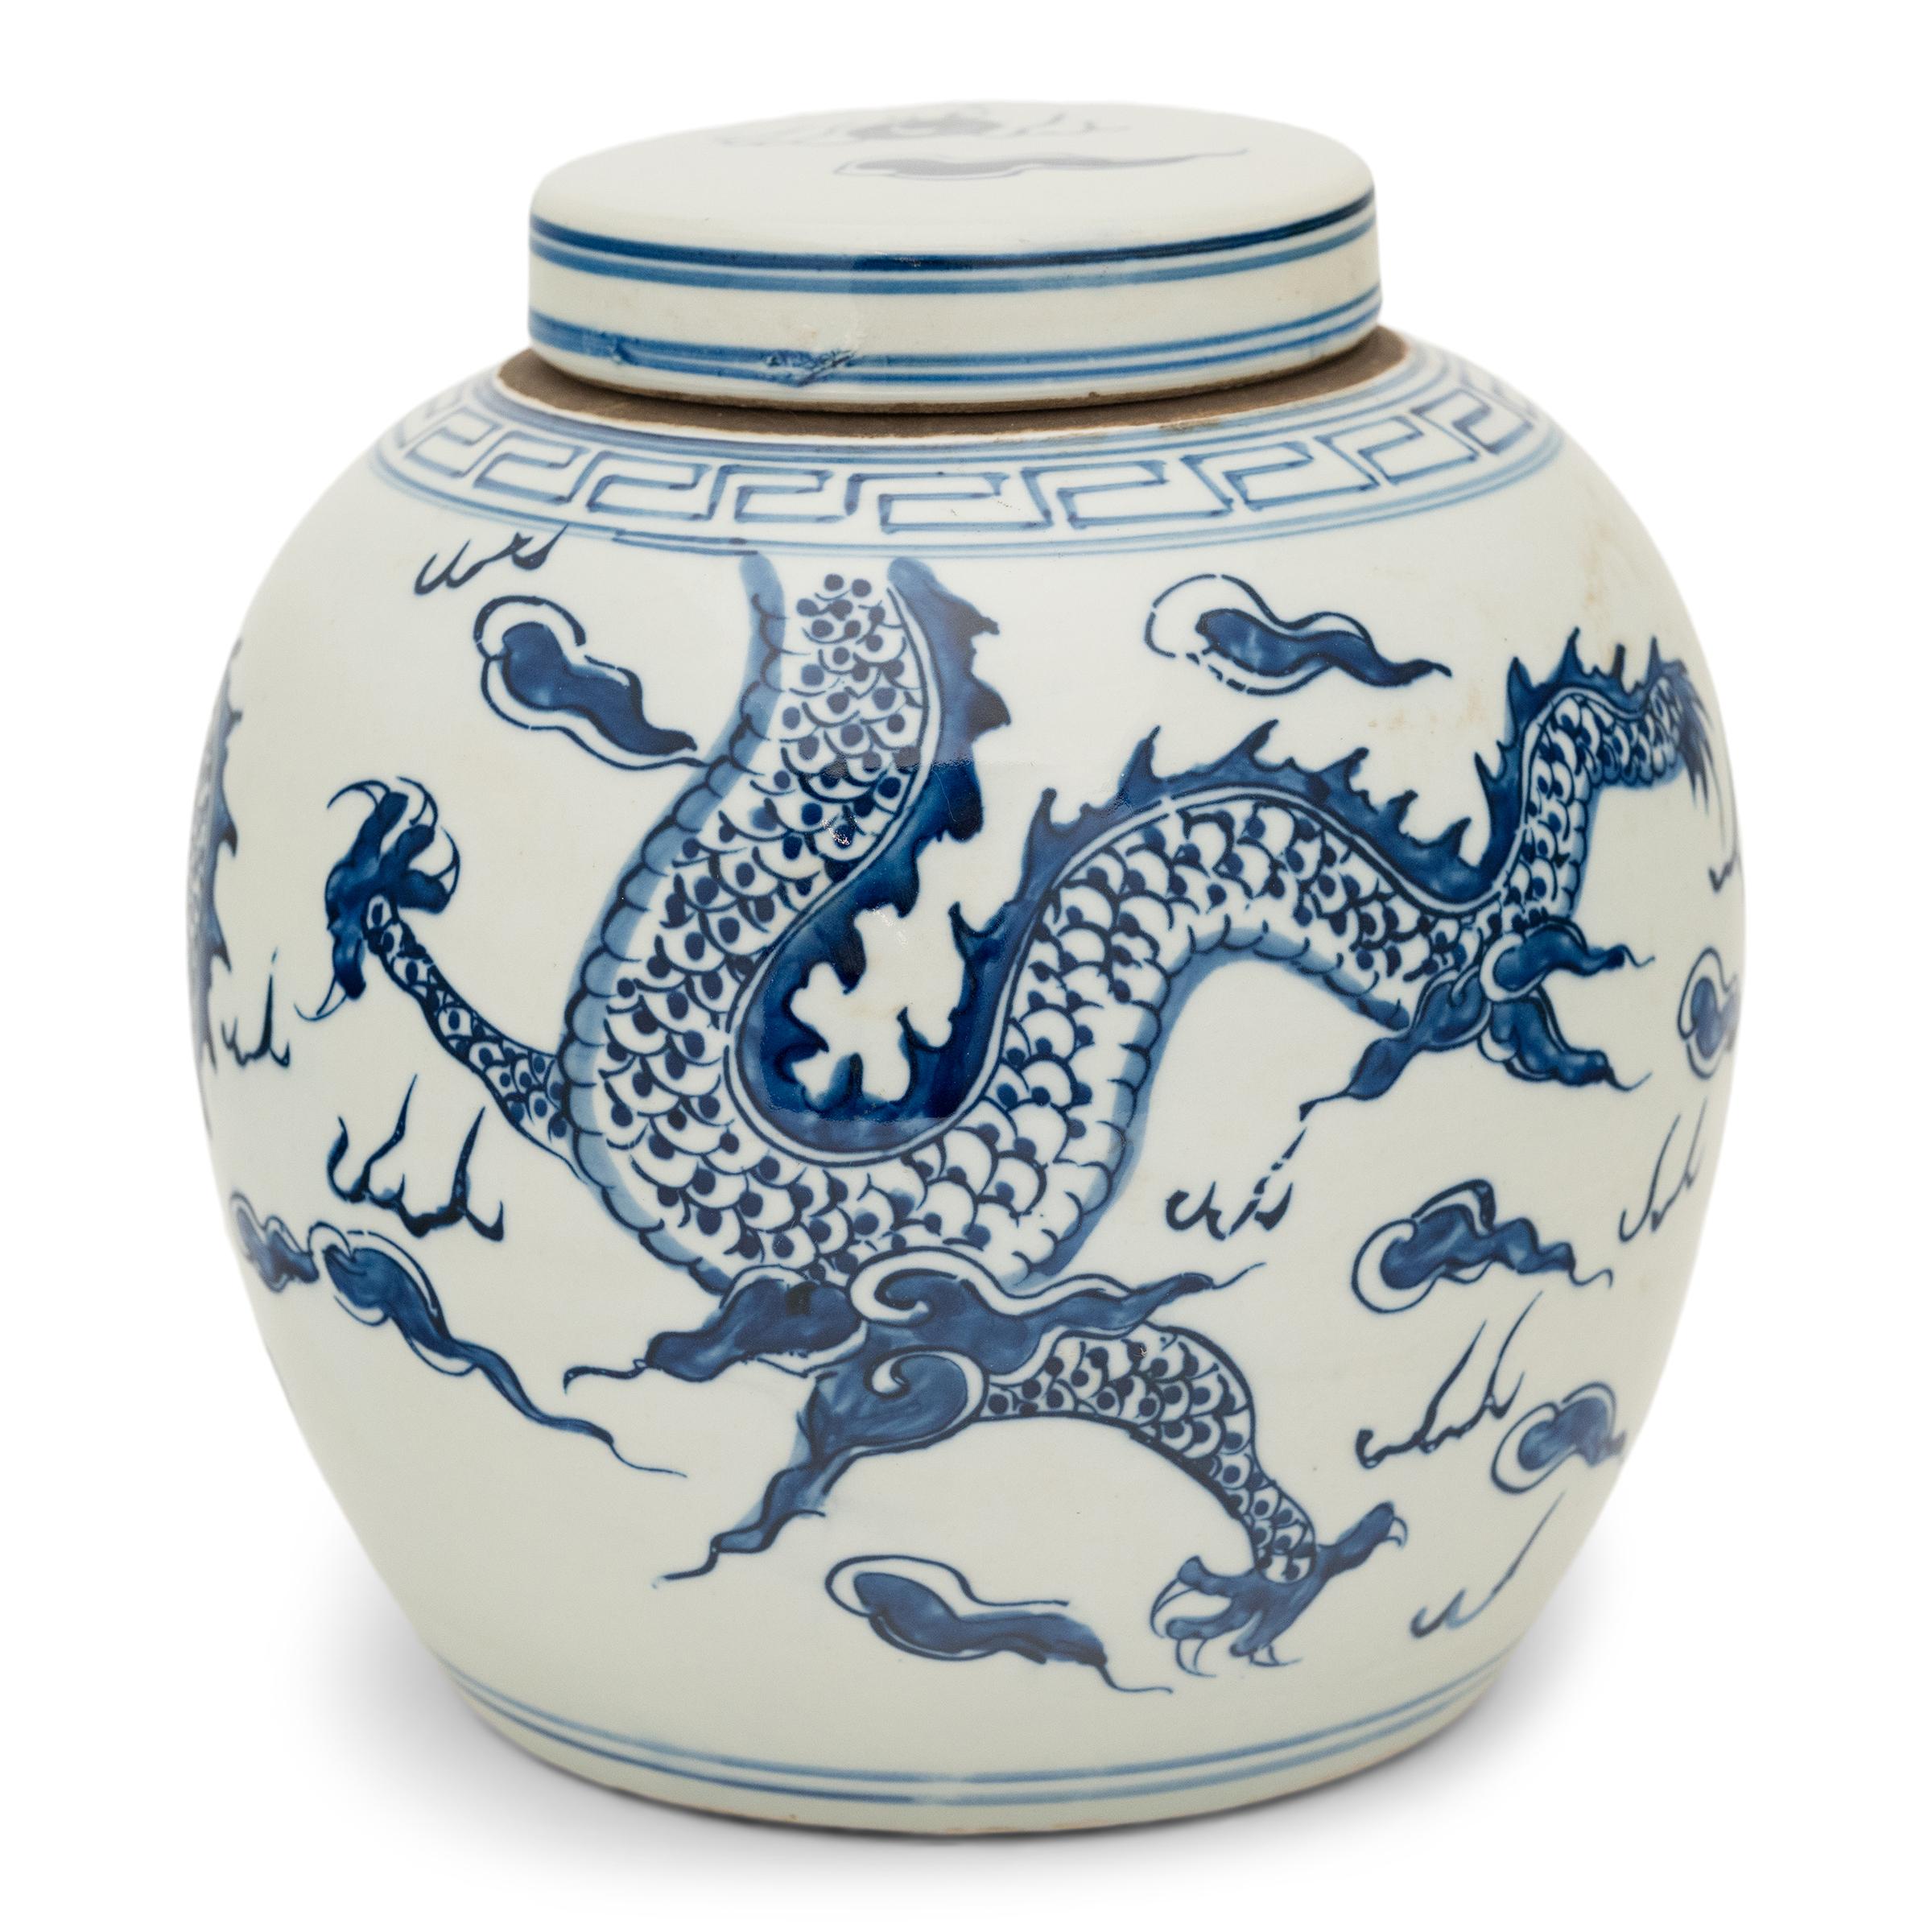 This large porcelain jar is beautifully glazed in the classic blue-and-white manner, with hand-painted cobalt-blue decoration against a crisp white field. The jar has a rounded form and flat lid, a traditional shape for jars used to hold Chinese tea